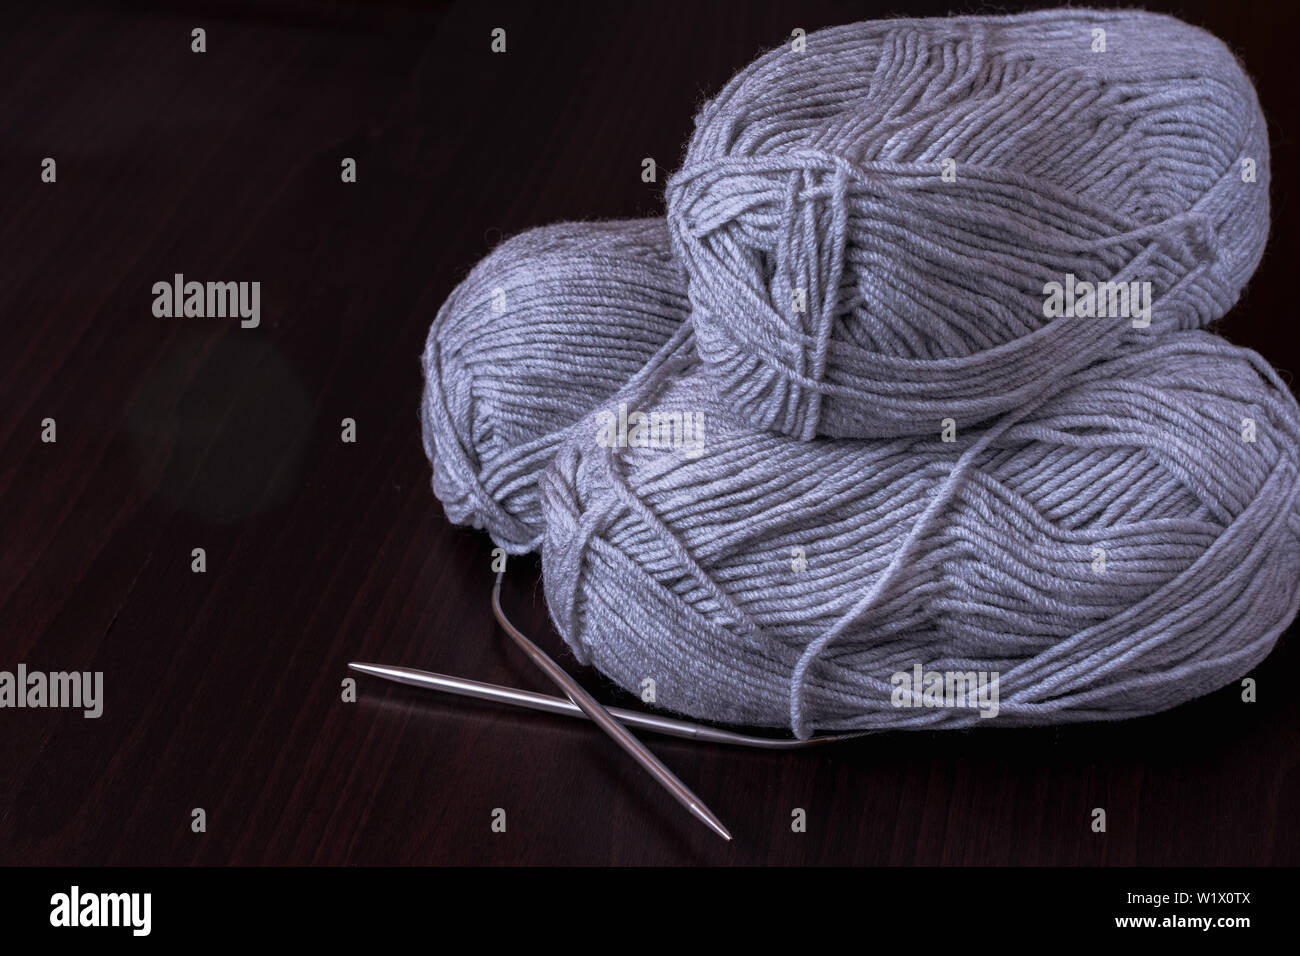 Hobbies and creative activities concept - three skeins of gray yarn with metal circular knitting needles on a wooden surface, selective focus, dark ke Stock Photo